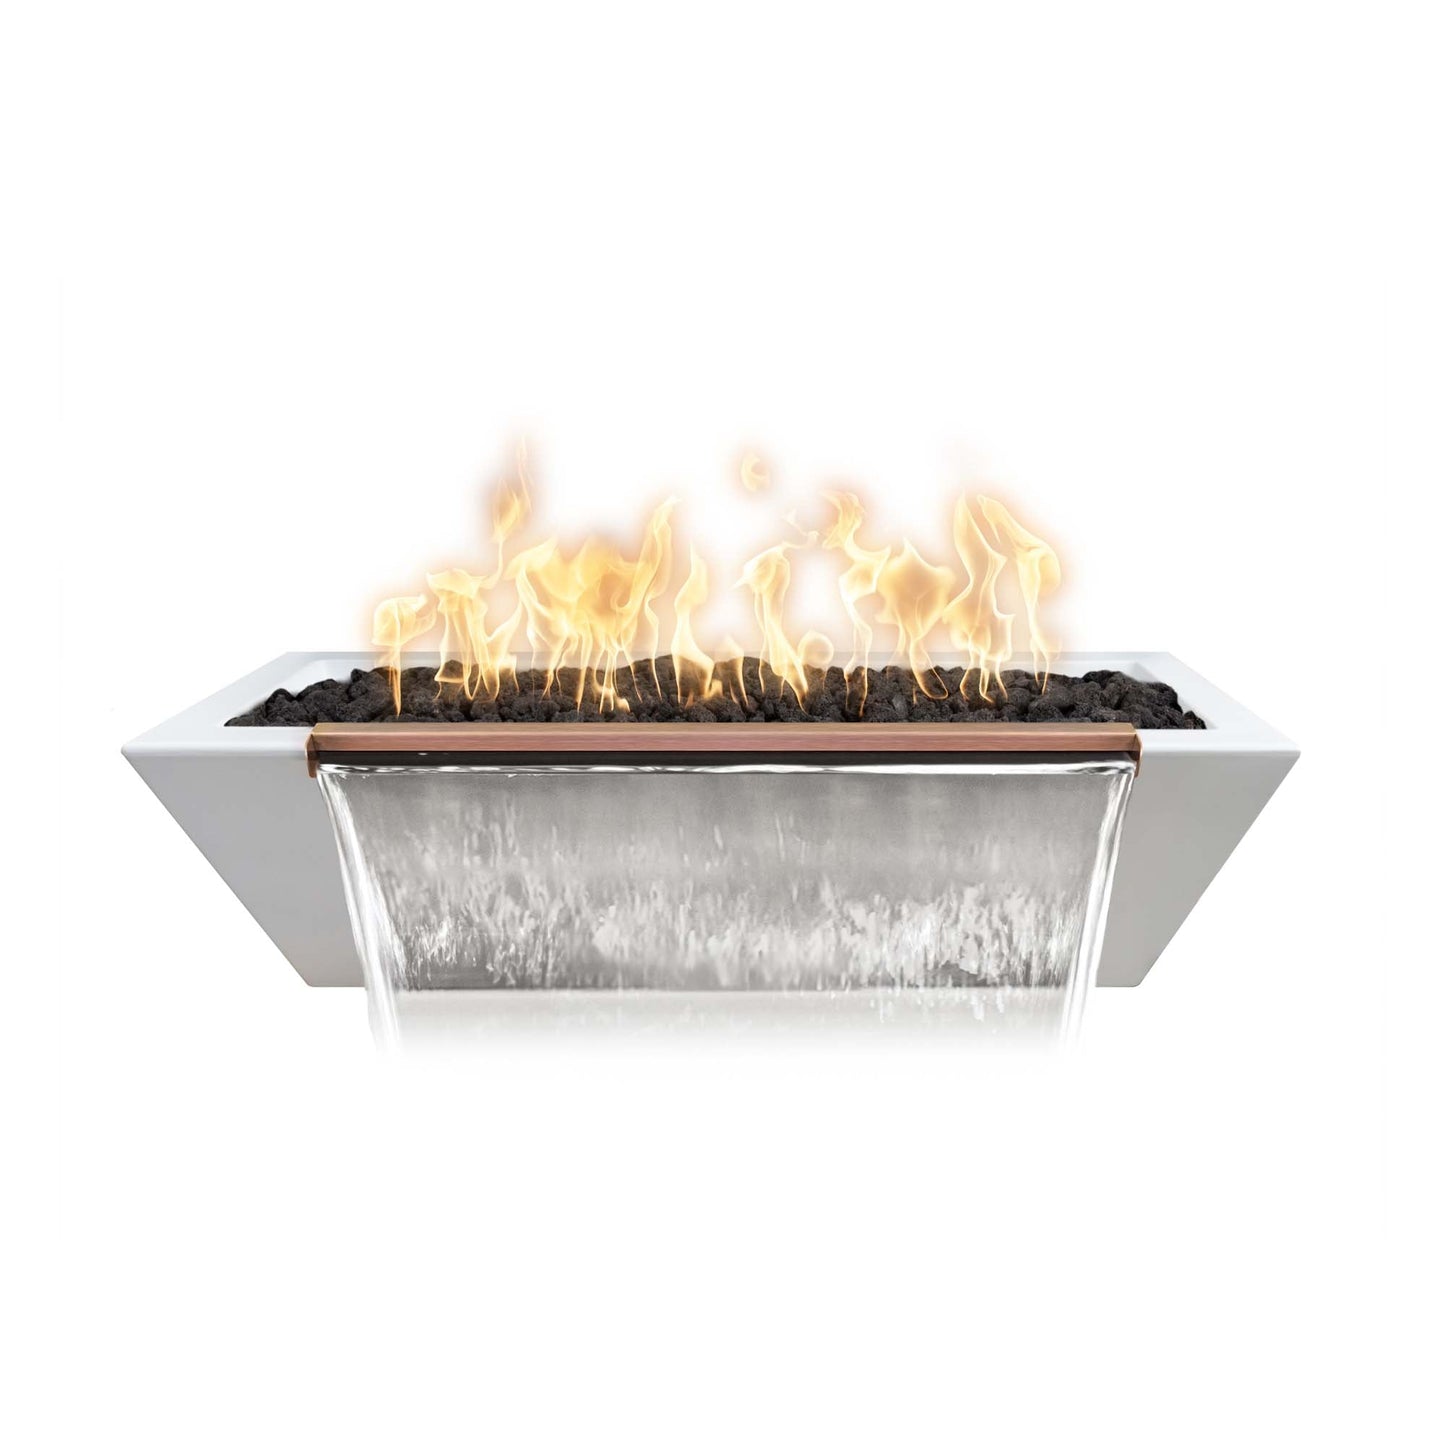 The Outdoor Plus Linear Maya 72" Rustic Moss Stone GFRC Concrete Natural Gas Fire & Water Bowl with Match Lit with Flame Sense Ignition